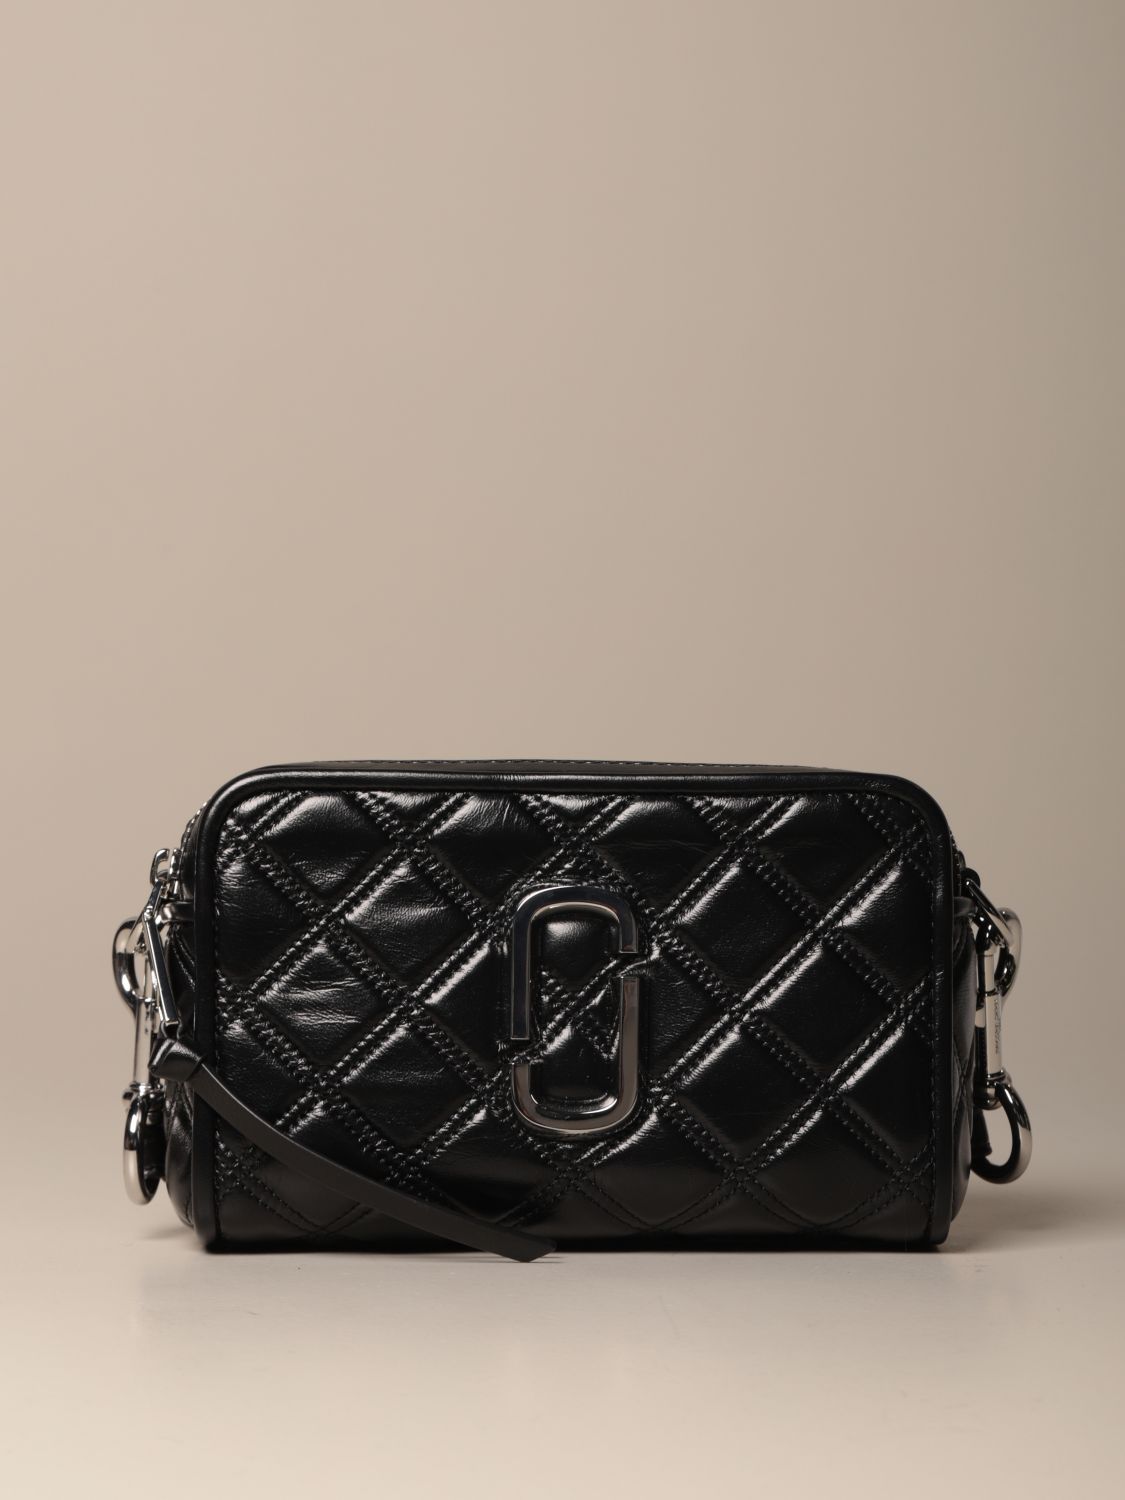 marc by marc jacobs bags